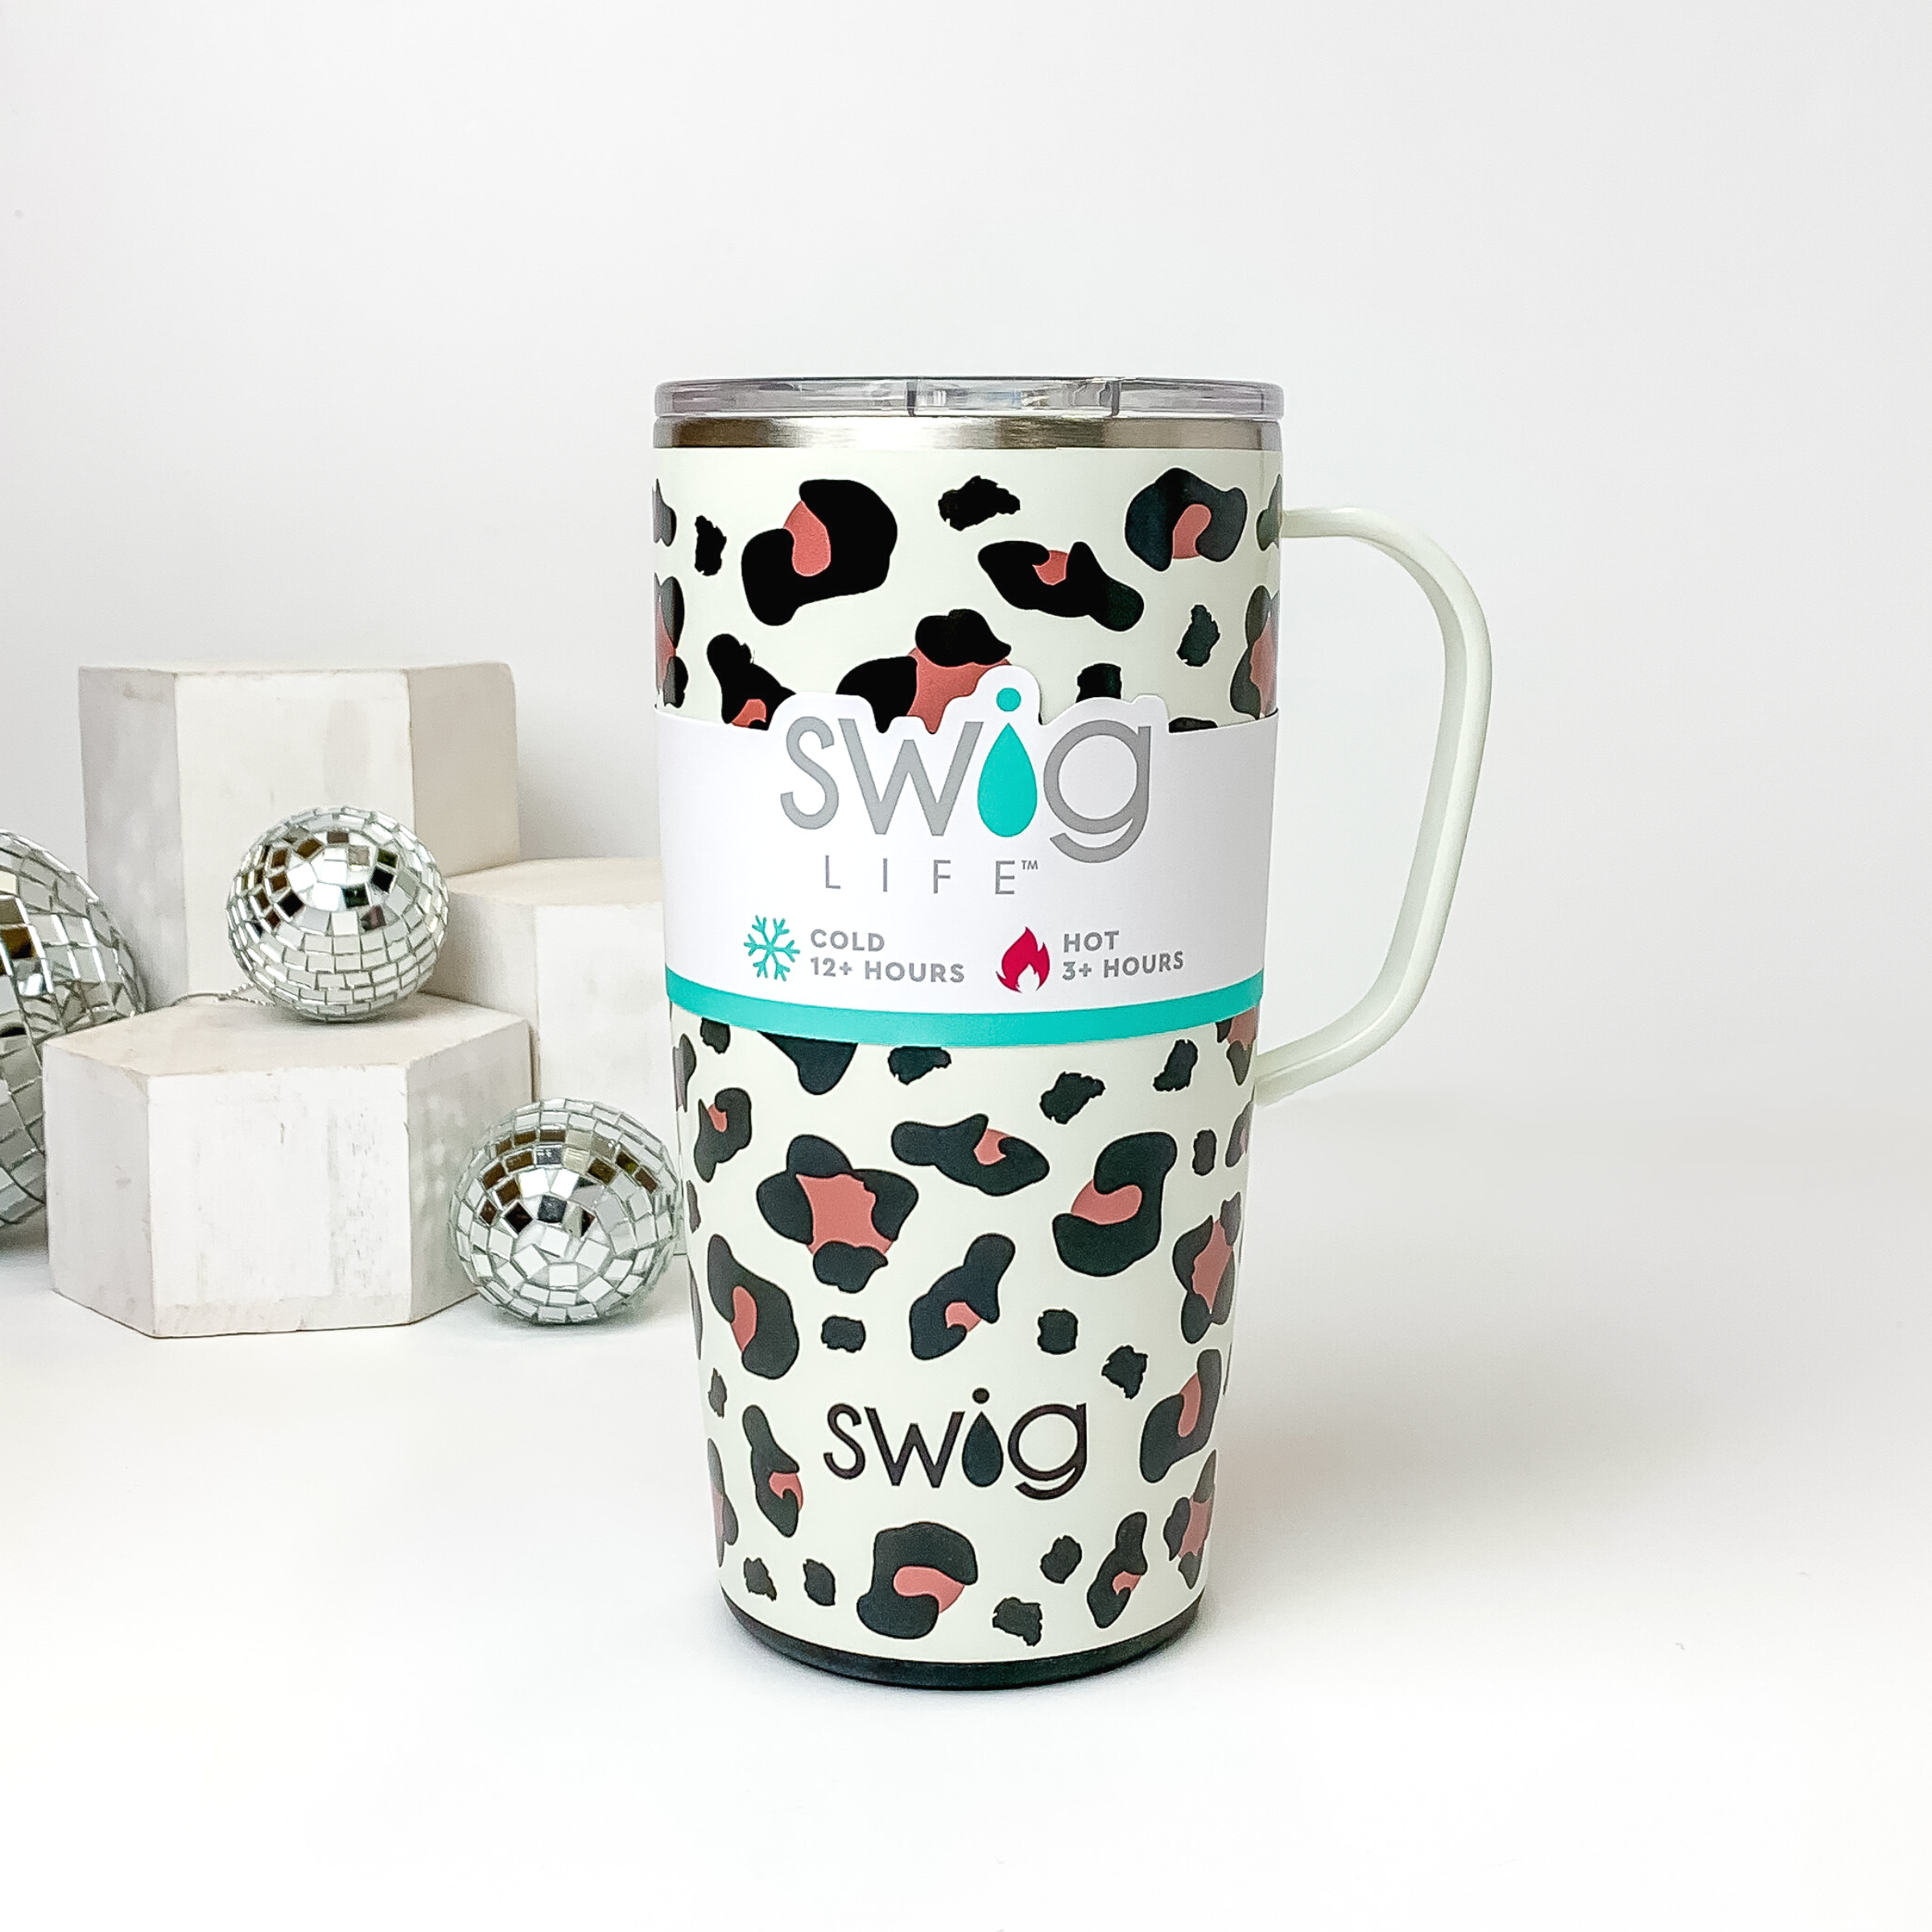 Swig on The Prowl Packi 12 Cooler